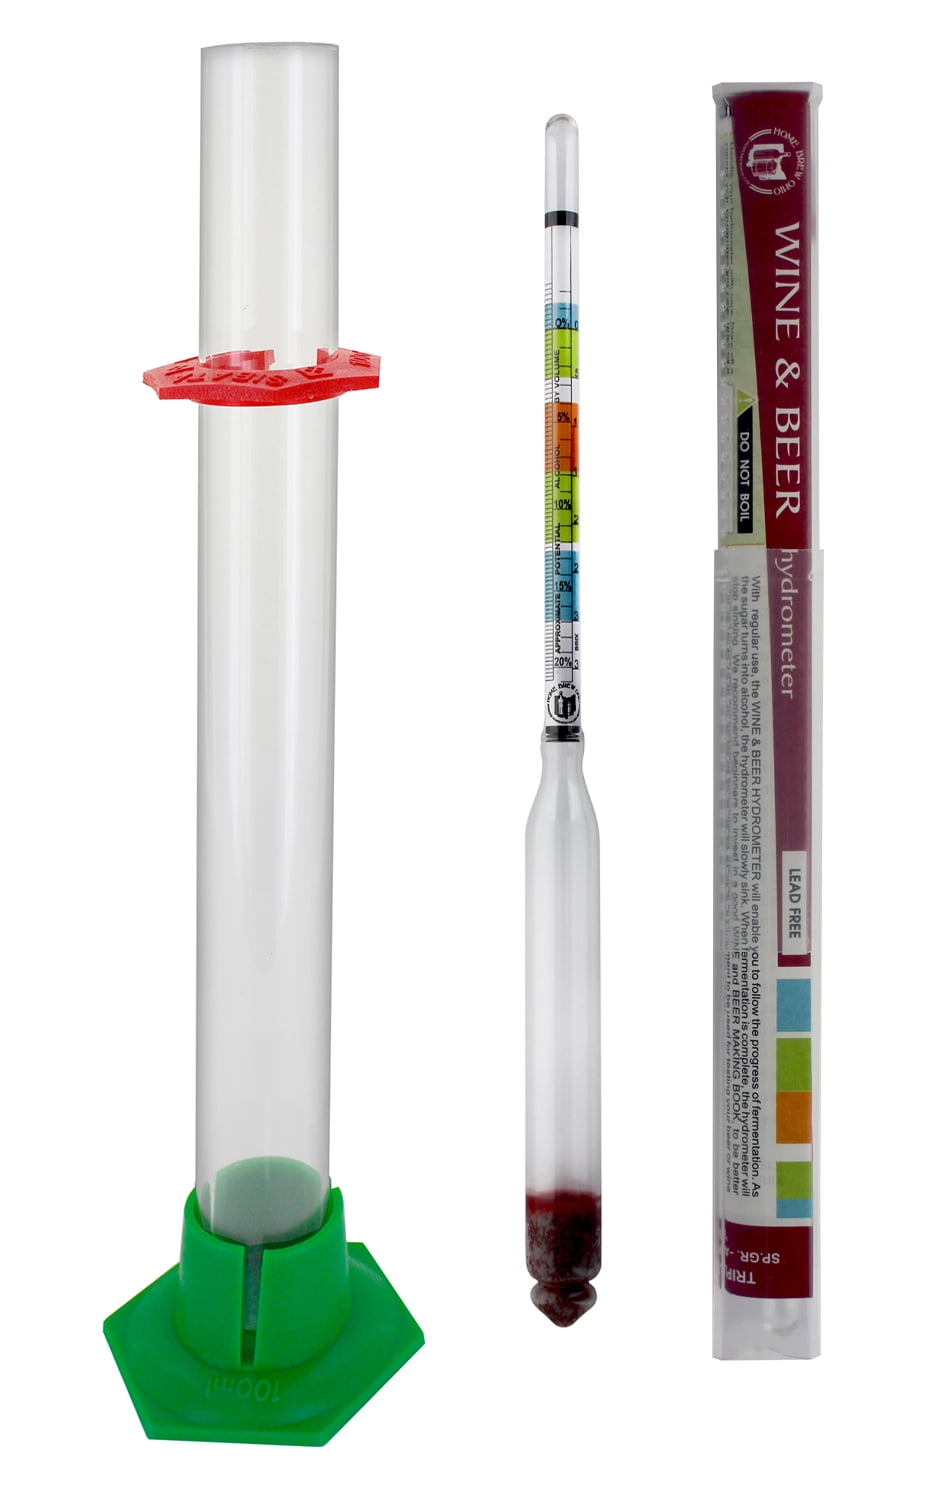 Beer And Wine Triple Scale Hydrometer For Home Brewing Hydrometer 